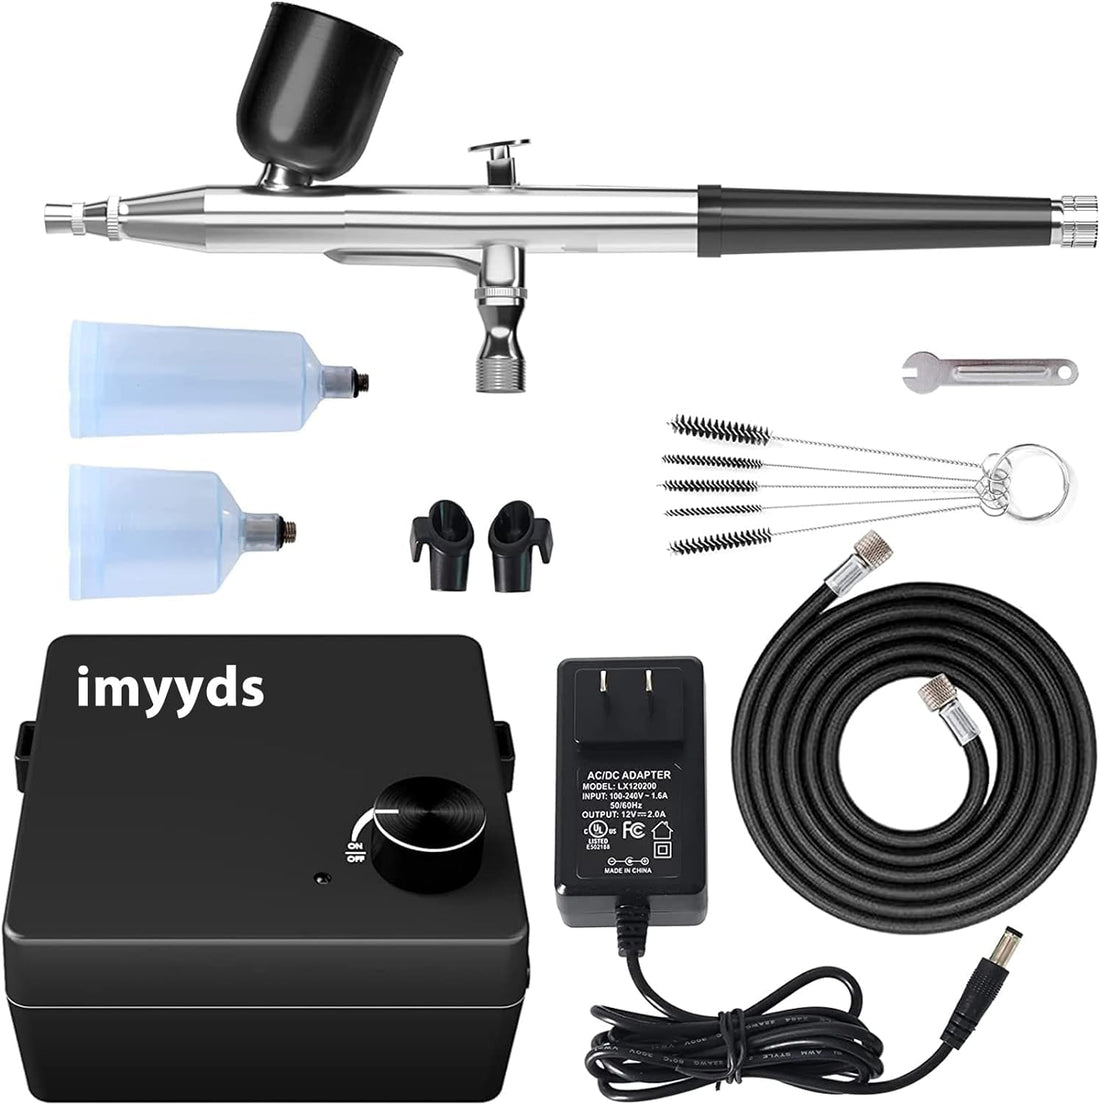 imyyds 35PSI Airbrush Kit with Compressor, Stepless Adjustable Air Brush Kit with Air Compressor, Portable Airbrush Gun Kit, Single-Action Air Brushes for Painting, Models, Crafts, Nails, Makeup